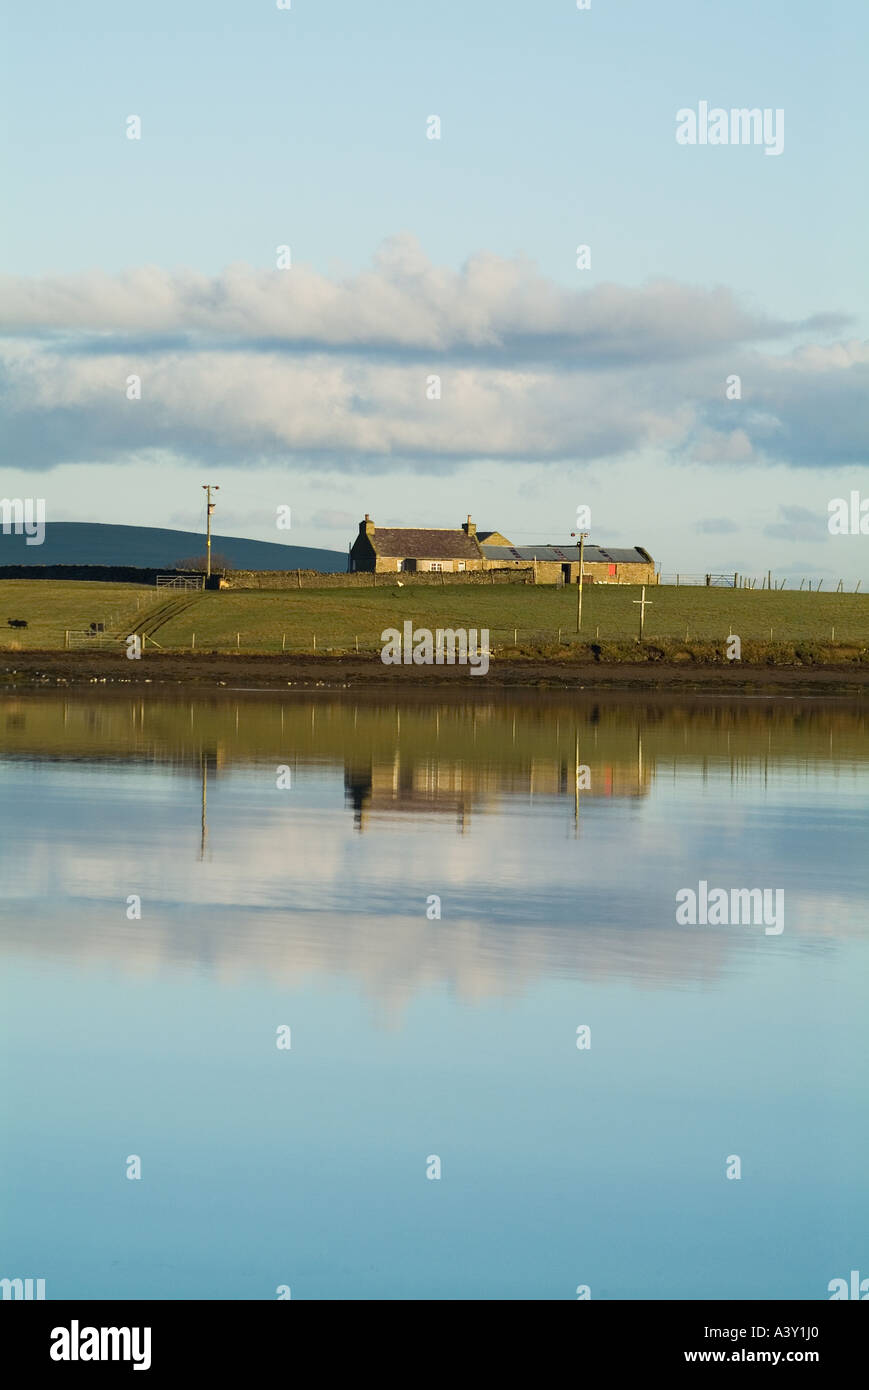 dh Bay of Firth FIRTH ORKNEY Farm on Holm of Grimbister island Stock Photo